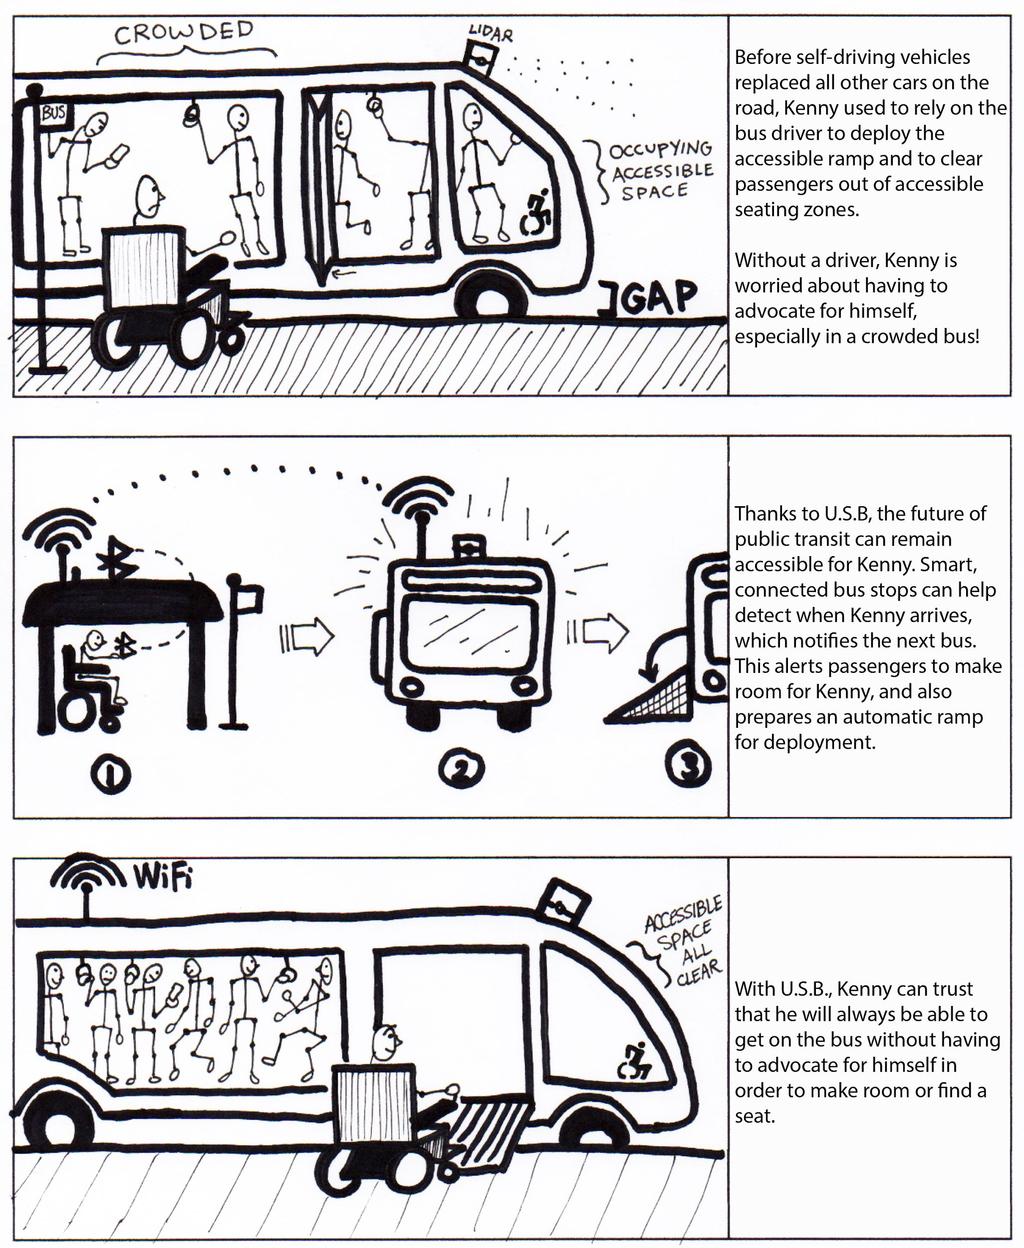 Universal SelfDriving Bus Feedback from speed dating storyboard concepts among both wheelchair and non-wheelchair users: It's a federal law to reserve spaces for people with